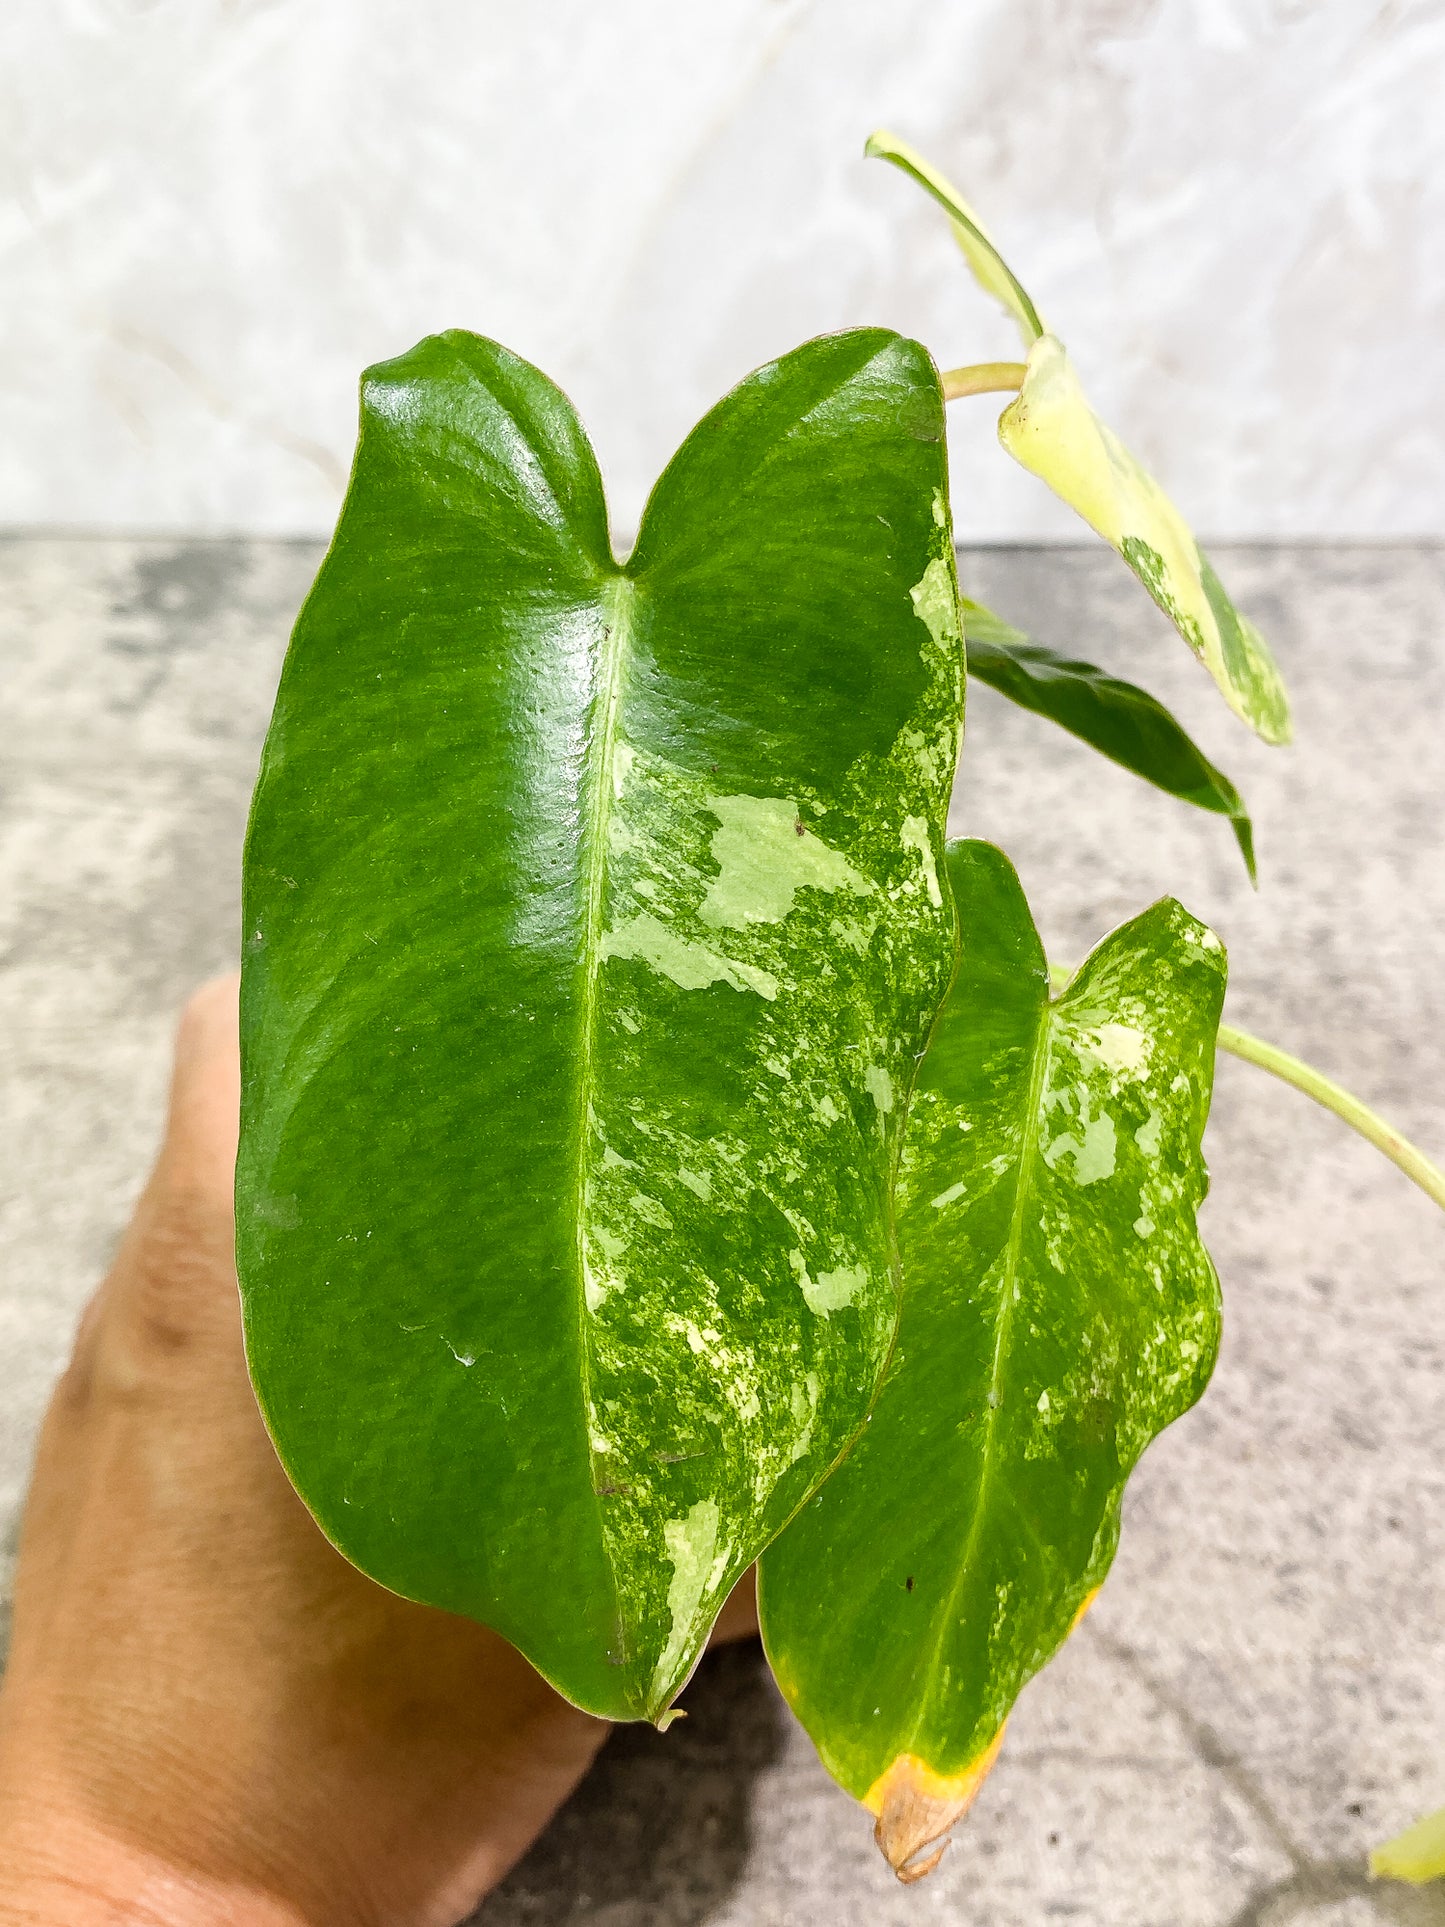 Philodendron Burle Marx Variegated 5 leaves 1 unfurling 1 sprout slightly rooted